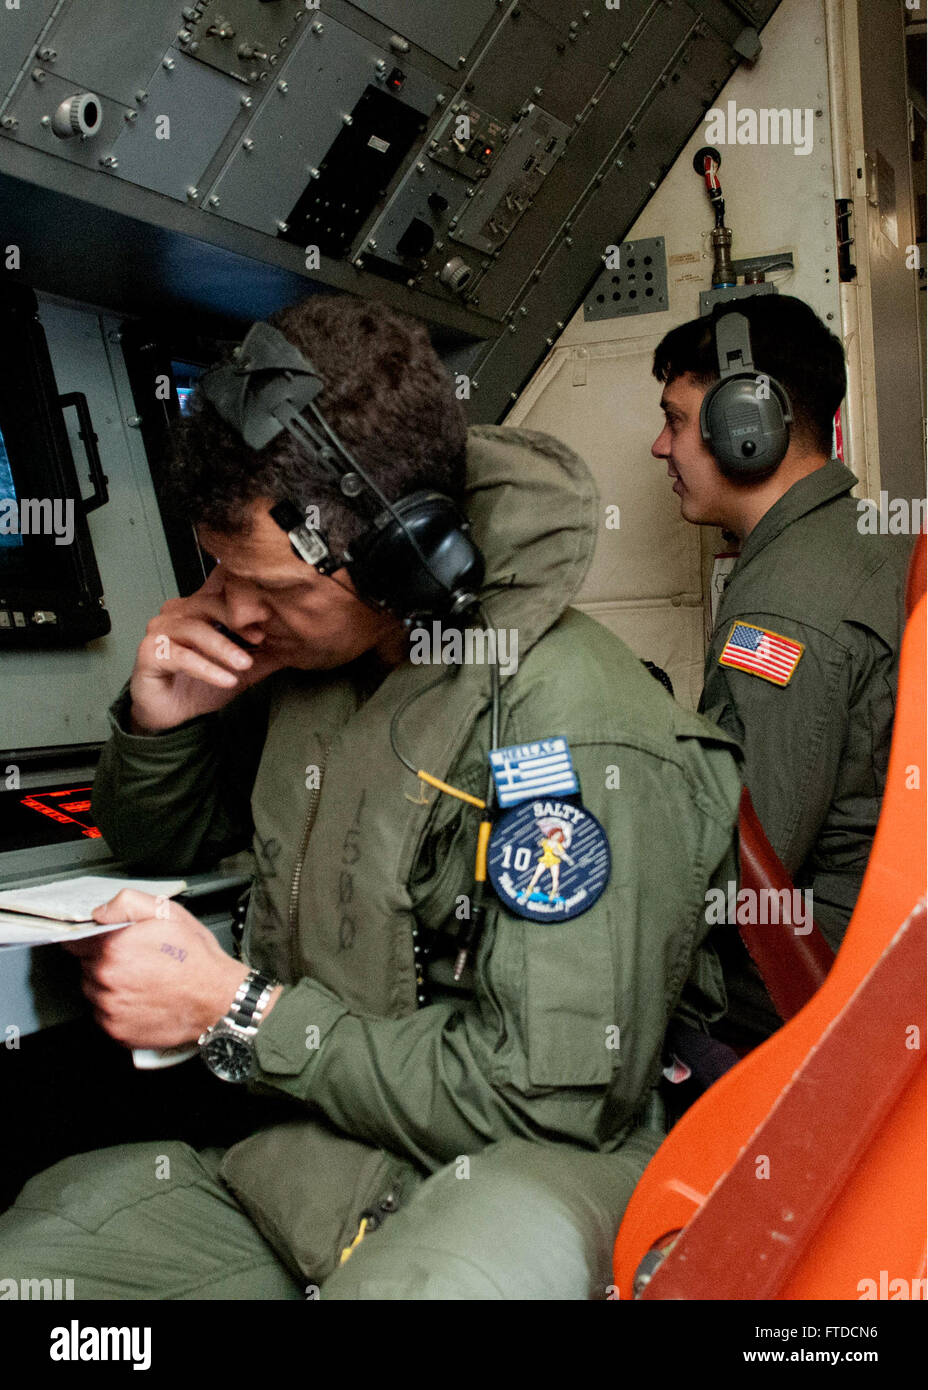 150520-N-YA681-204 MEDITERRANEAN SEA (May 20, 2015) Hellenic Air Force Lt. Cmdr. Kyriakos Koympis, left, conducts operations with Naval Air Crewman Operator 3rd Class Joseph Gallegos, a member of Patrol Squadron 47, aboard a P3-C Orion aircraft during Exercise Phoenix Express 2015, May 20.. Phoenix Express 2015, sponsored and facilitated by U.S. Africa Command, is designed to improve regional cooperation, maritime domain awareness, information-sharing practices, and tactical interdiction expertise to counter sea-based illicit activity in the region.  (U.S. Navy photo by Mass Communication Spec Stock Photo